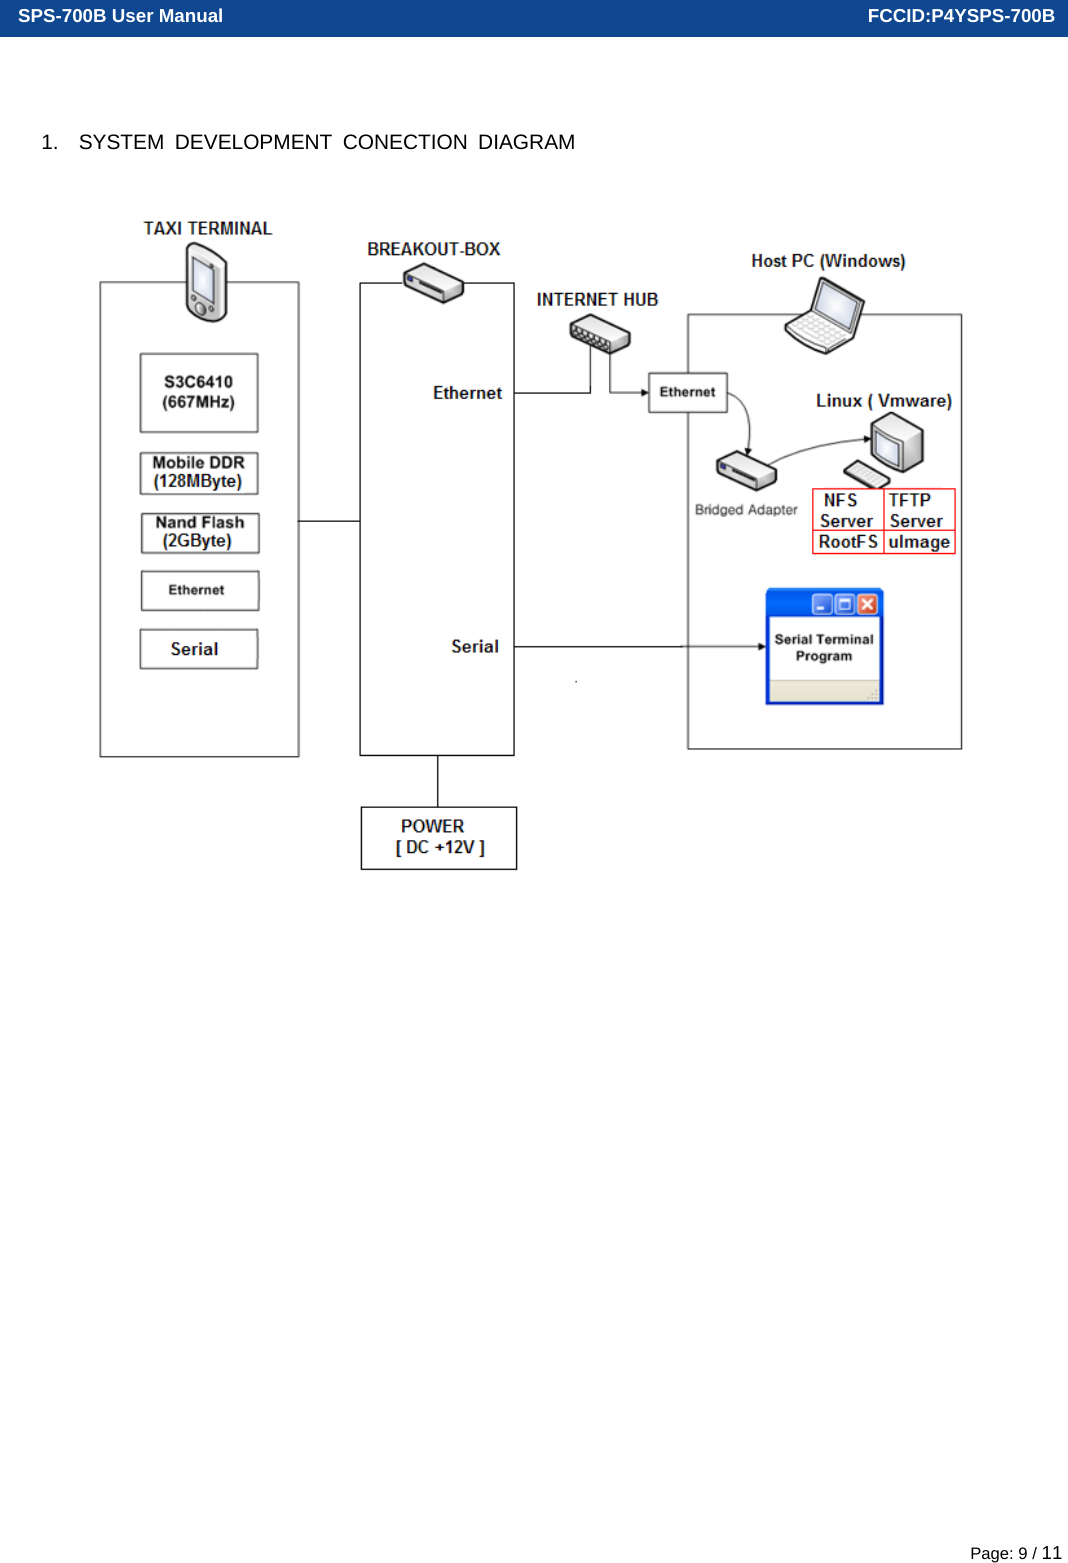  SPS-700B User Manual                                                                      FCCID:P4YSPS-700B Page: 9 / 11 1.  SYSTEM DEVELOPMENT CONECTION DIAGRAM   